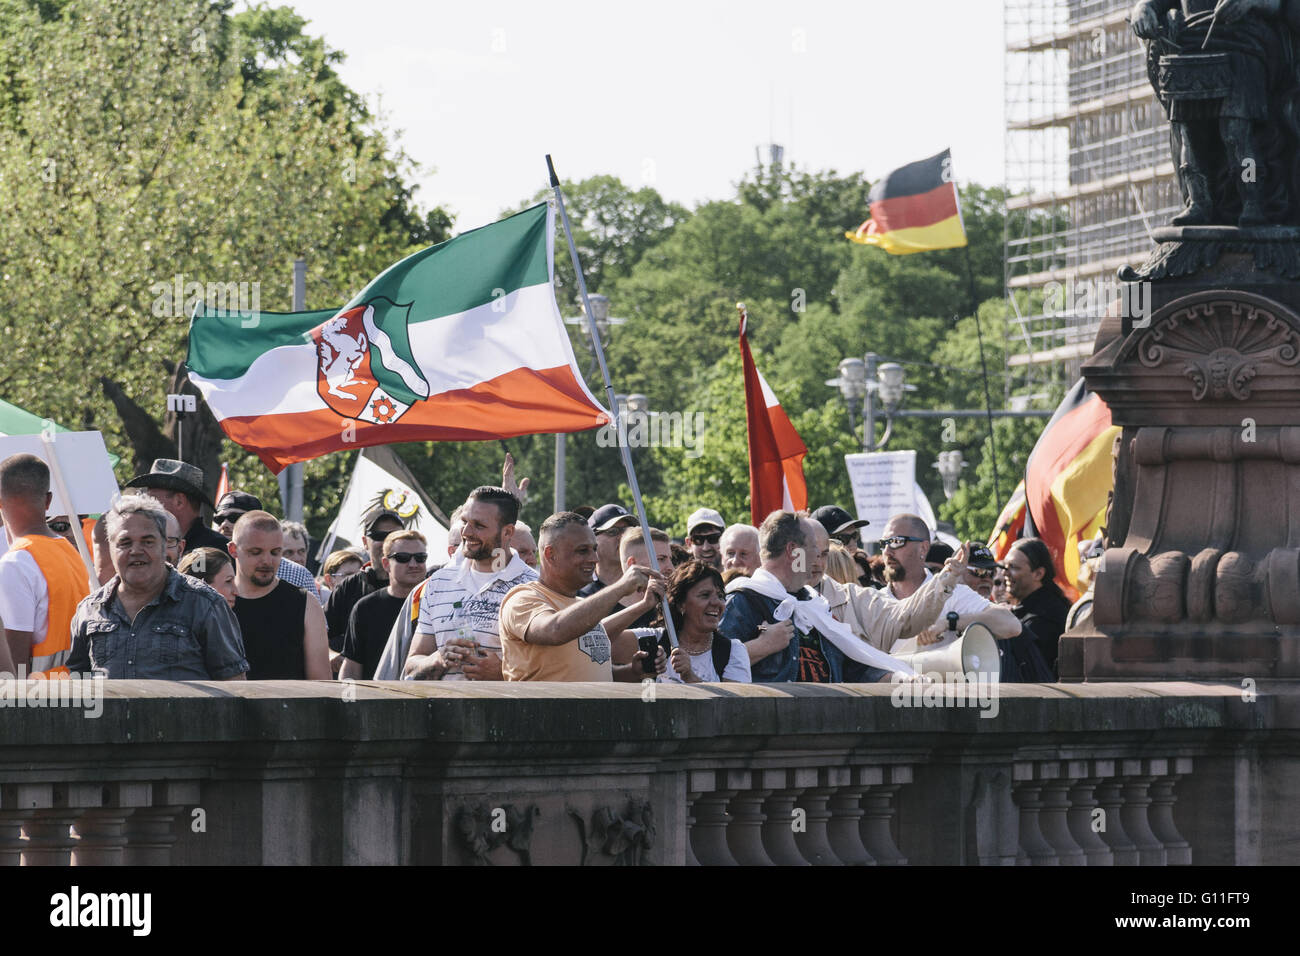 Berlin, Berlin, Germany. 7th May, 2016. Protesters react to counter-activists near Berlin central station during the rally held under the motto 'Merkel muss weg![Merkel must go]' organised by far-right group 'We for Berlin & We for Germany' Credit:  Jan Scheunert/ZUMA Wire/Alamy Live News Stock Photo